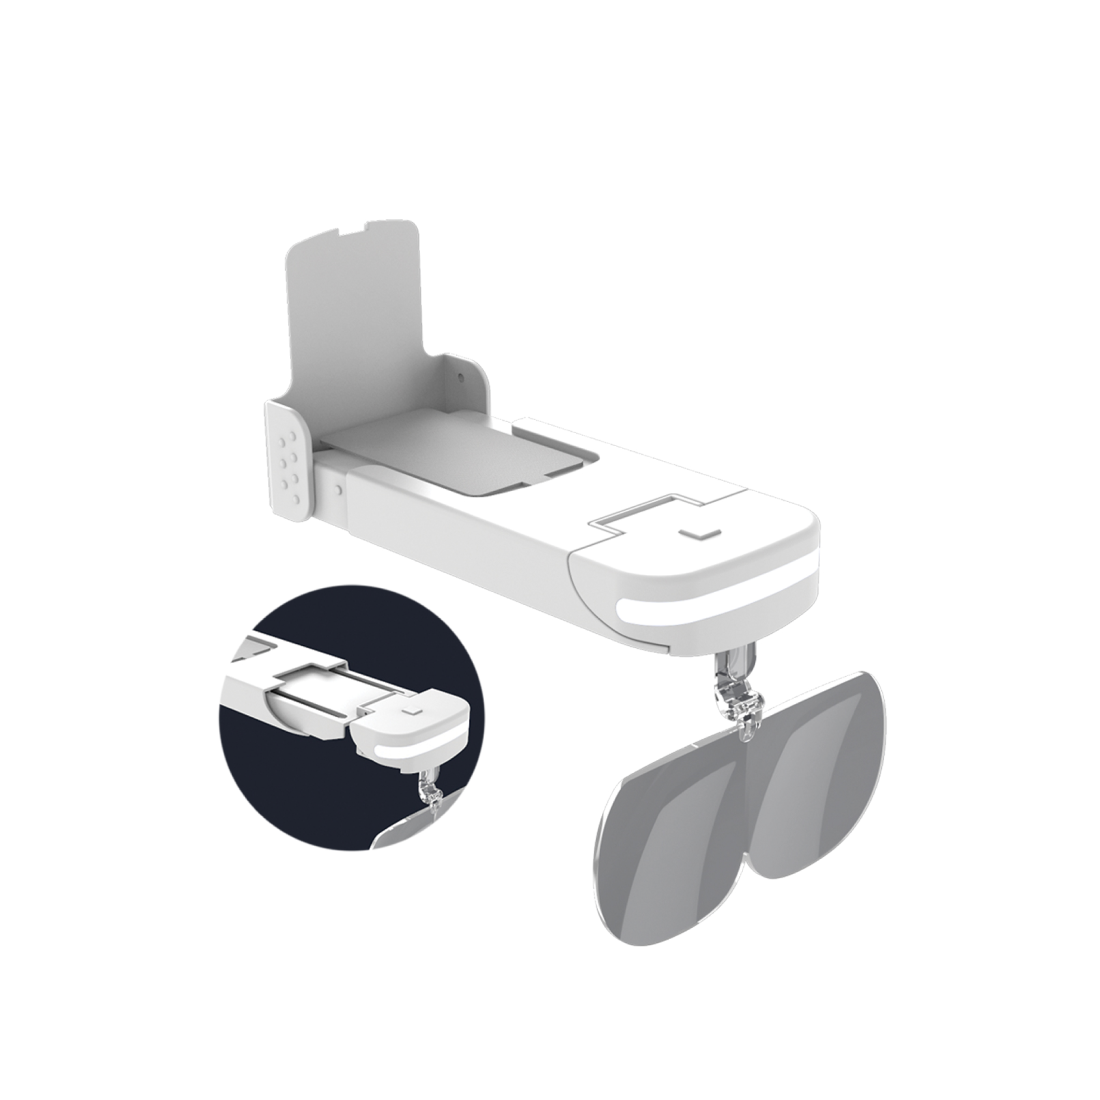 An image of a Michael Todd Beauty device with a pair of Younilook Cosmetic Readers attached, designed for portable vision assistance.